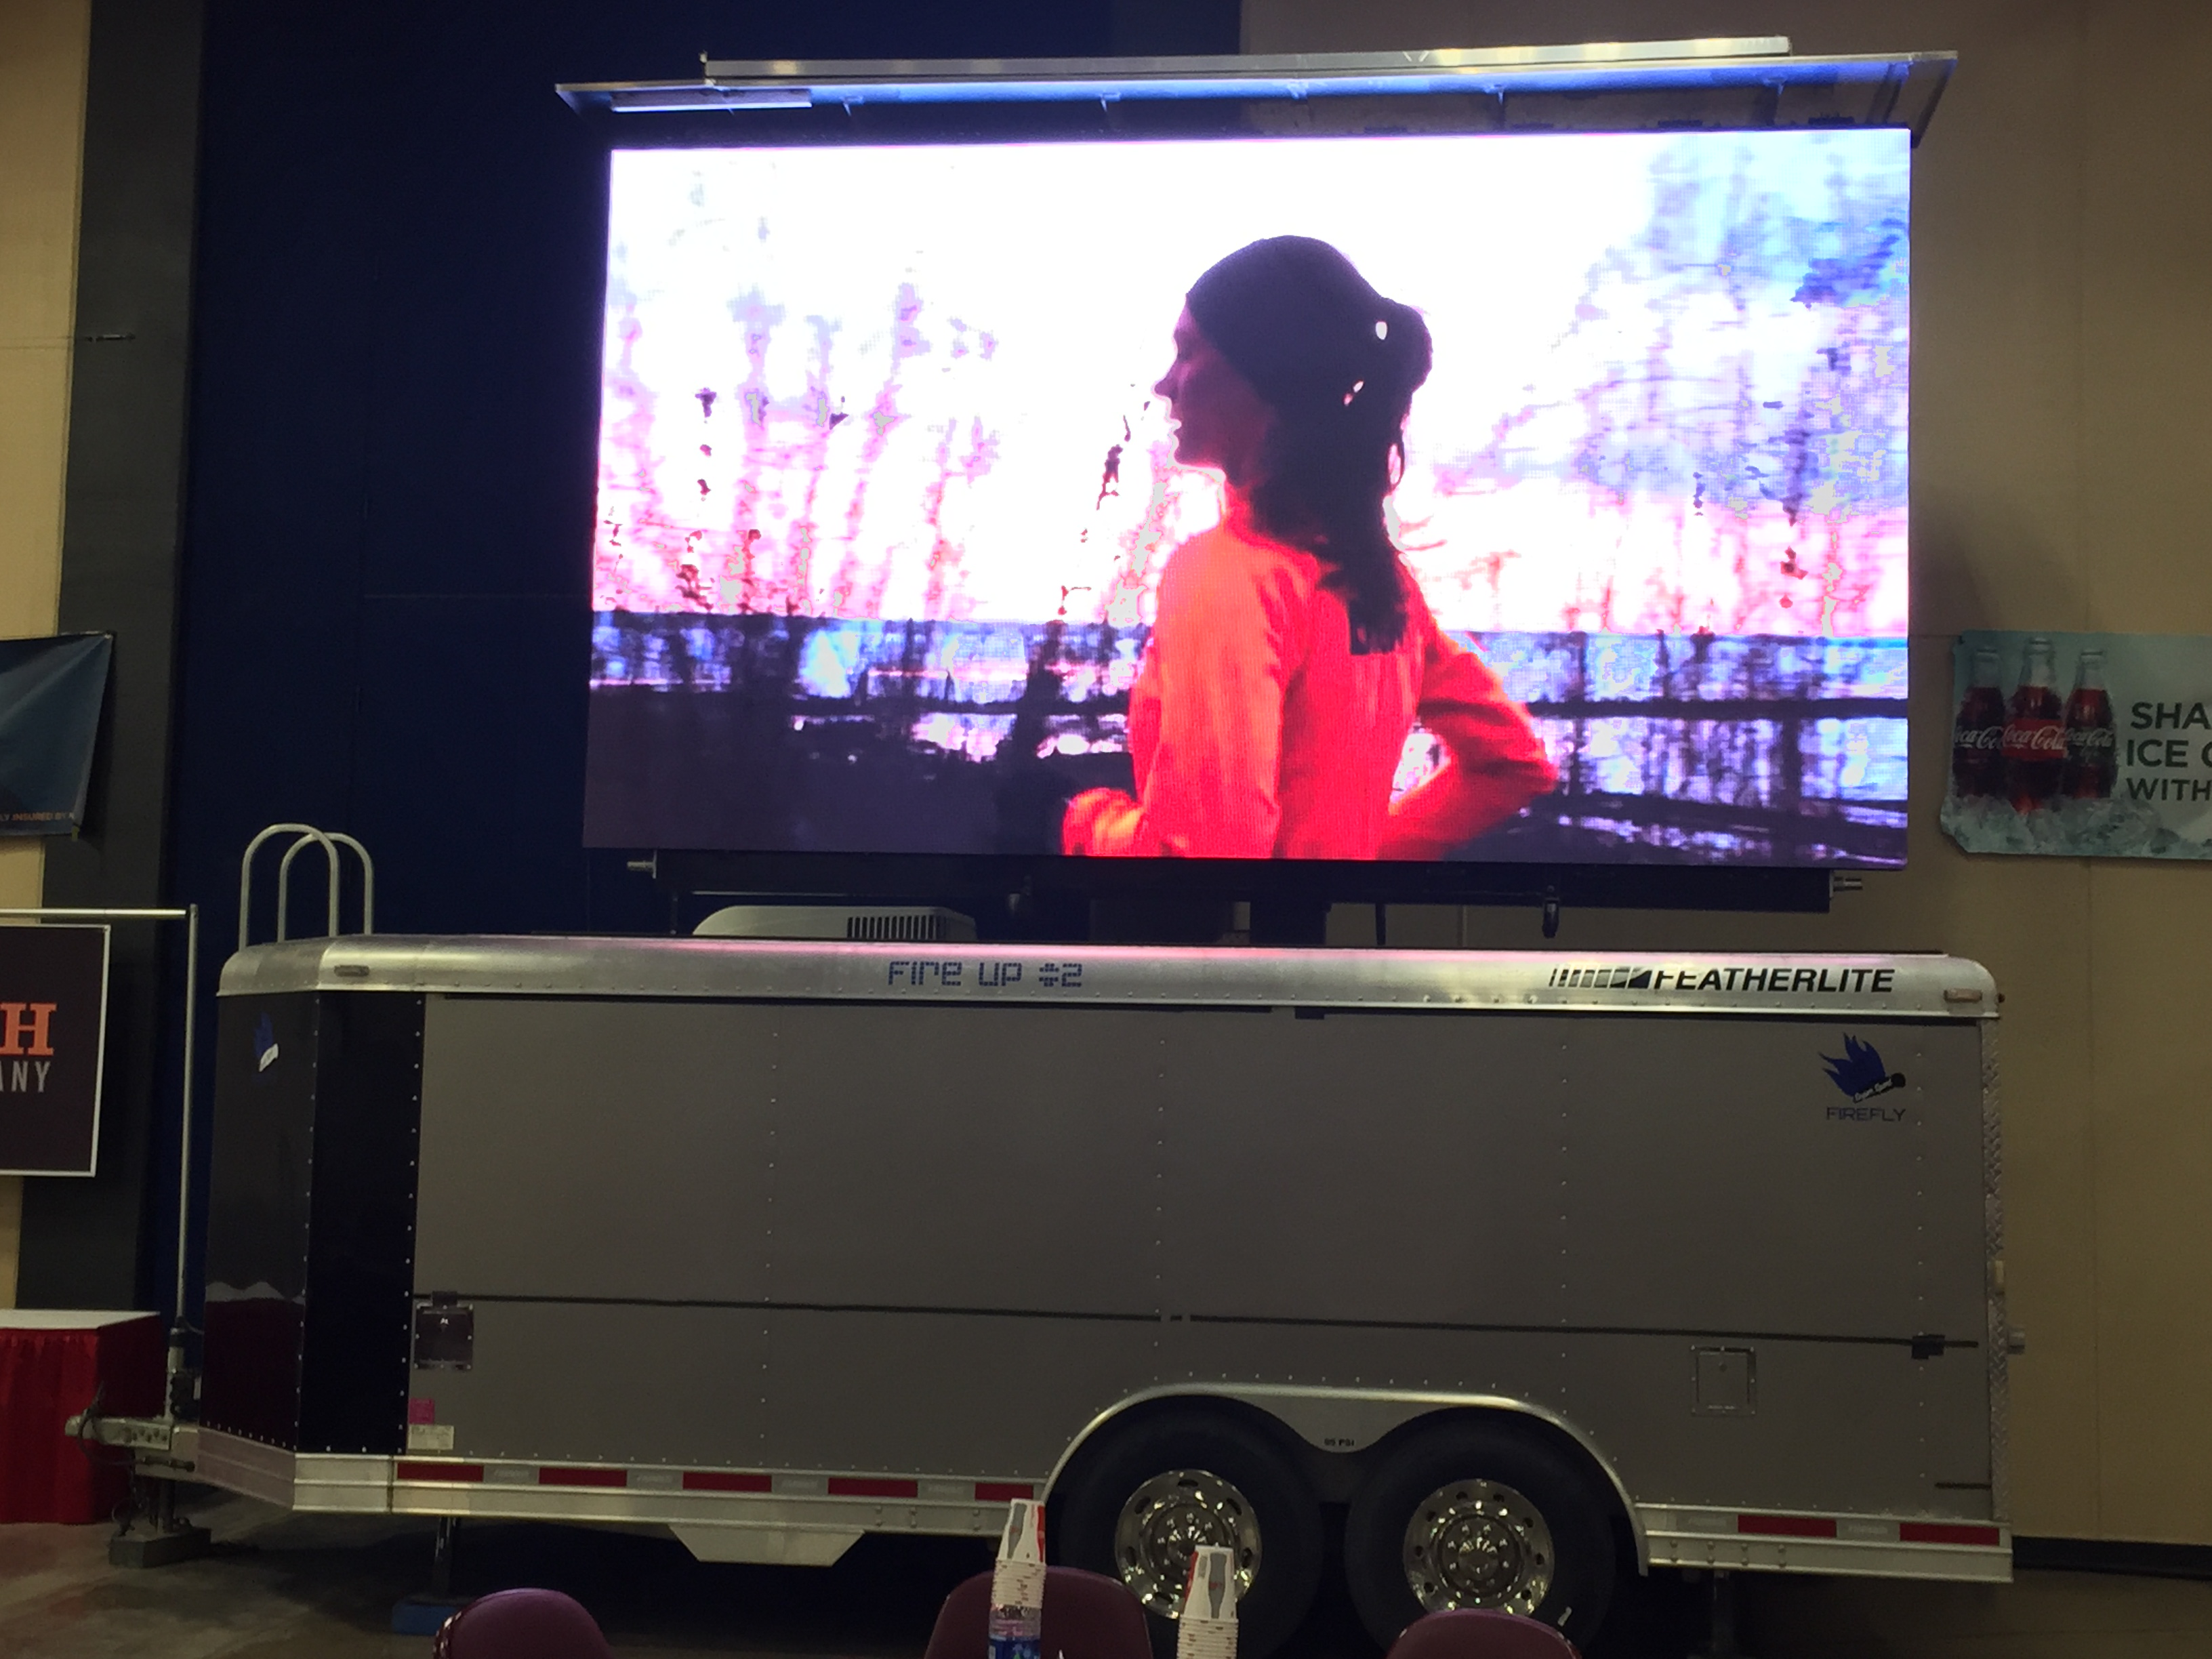 led portable video screen jumbotron for rental at events